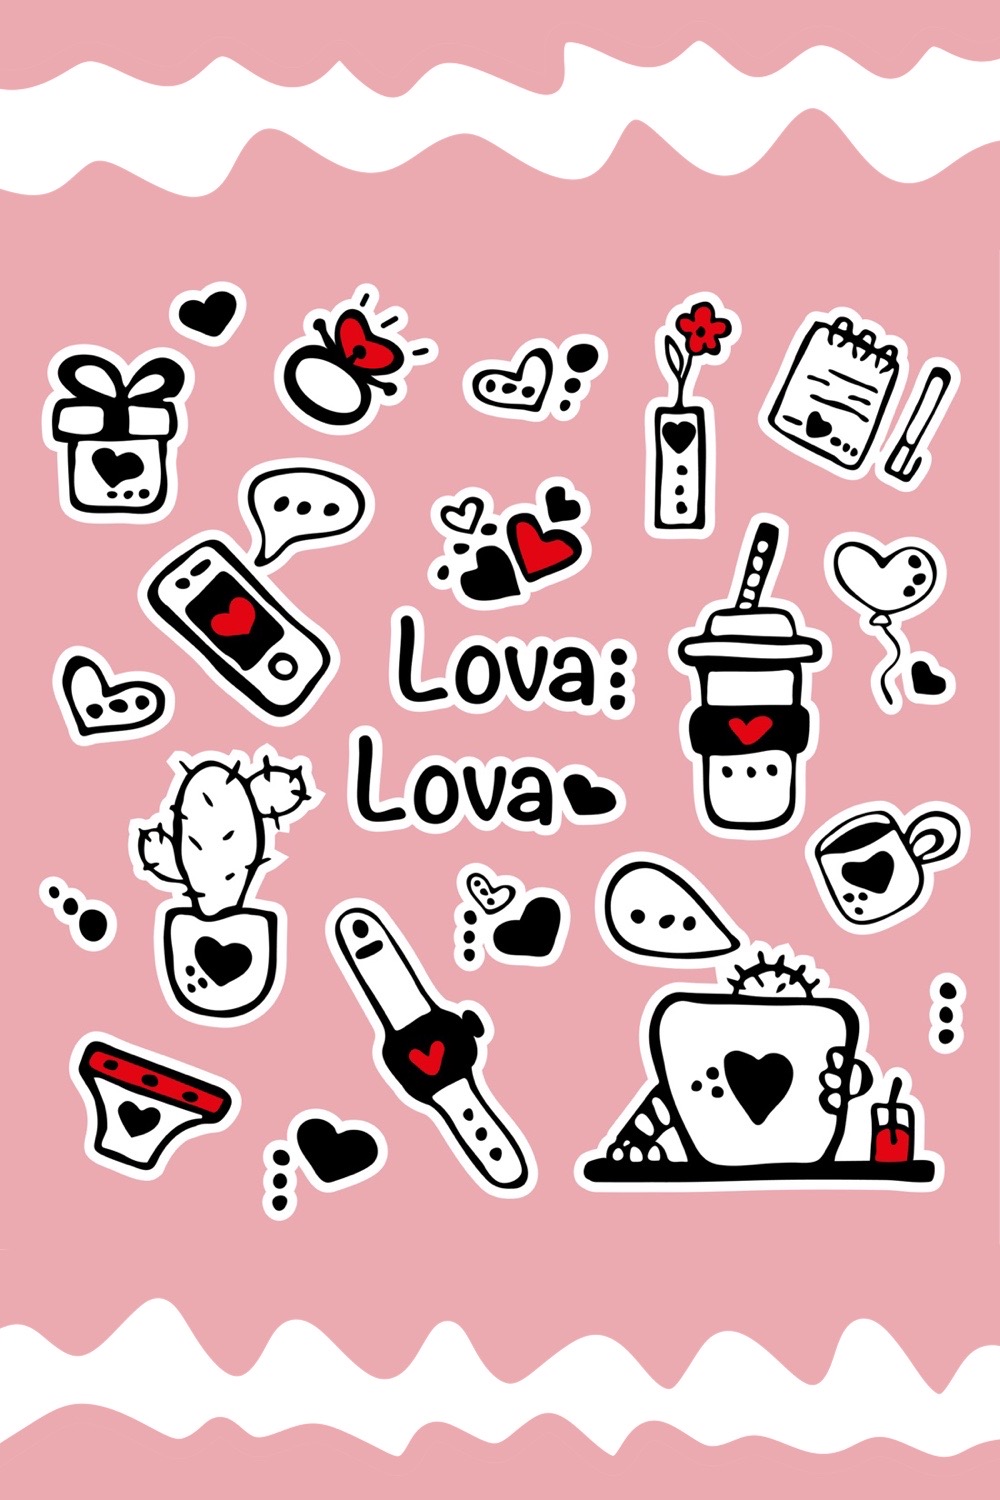 Love in Everyday Life Stickers Clipart pinterest image.